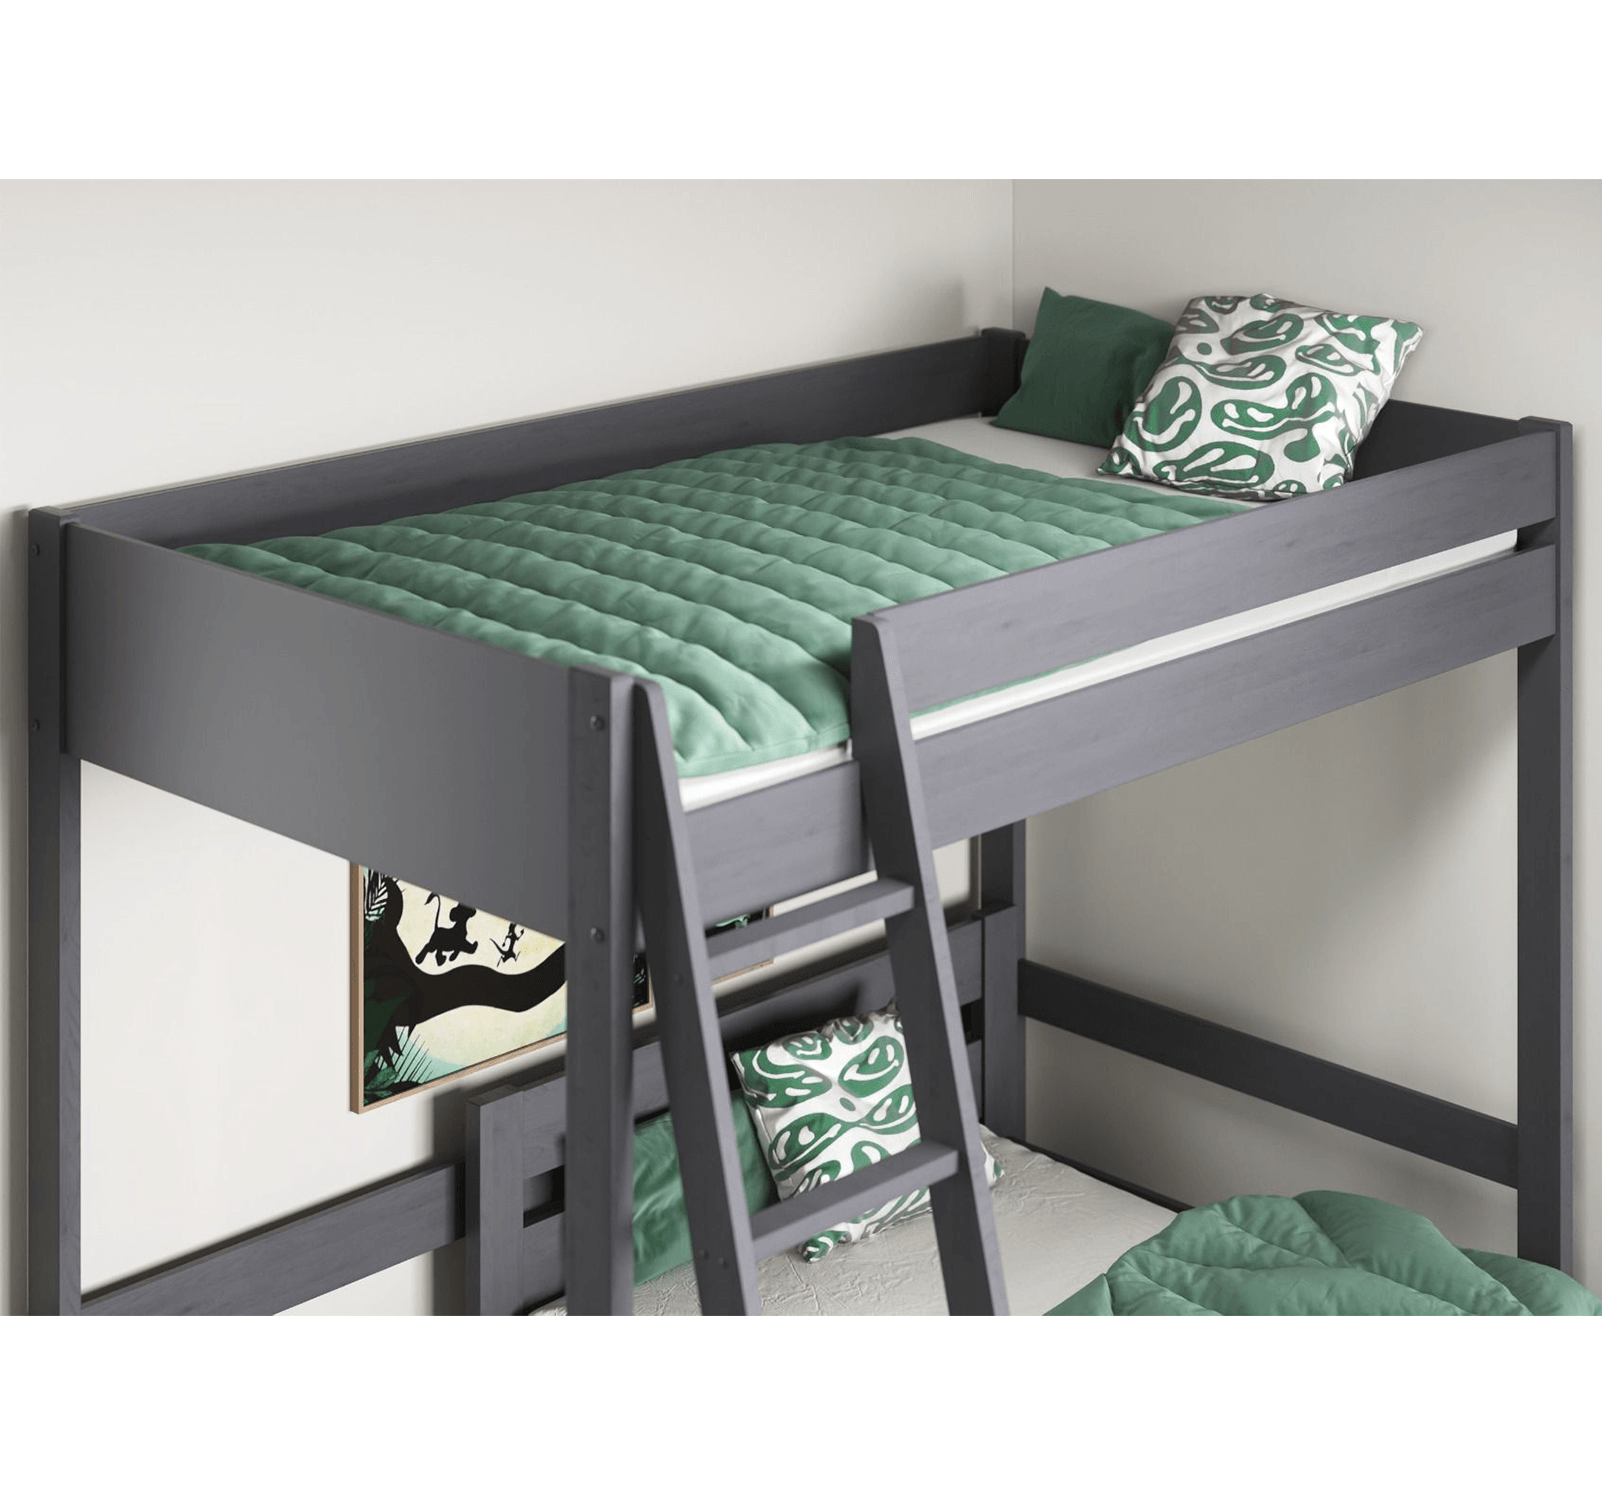 Noomi Tera Small Double High Sleeper with Single L Shaped Bunk Bed Frame in Grey